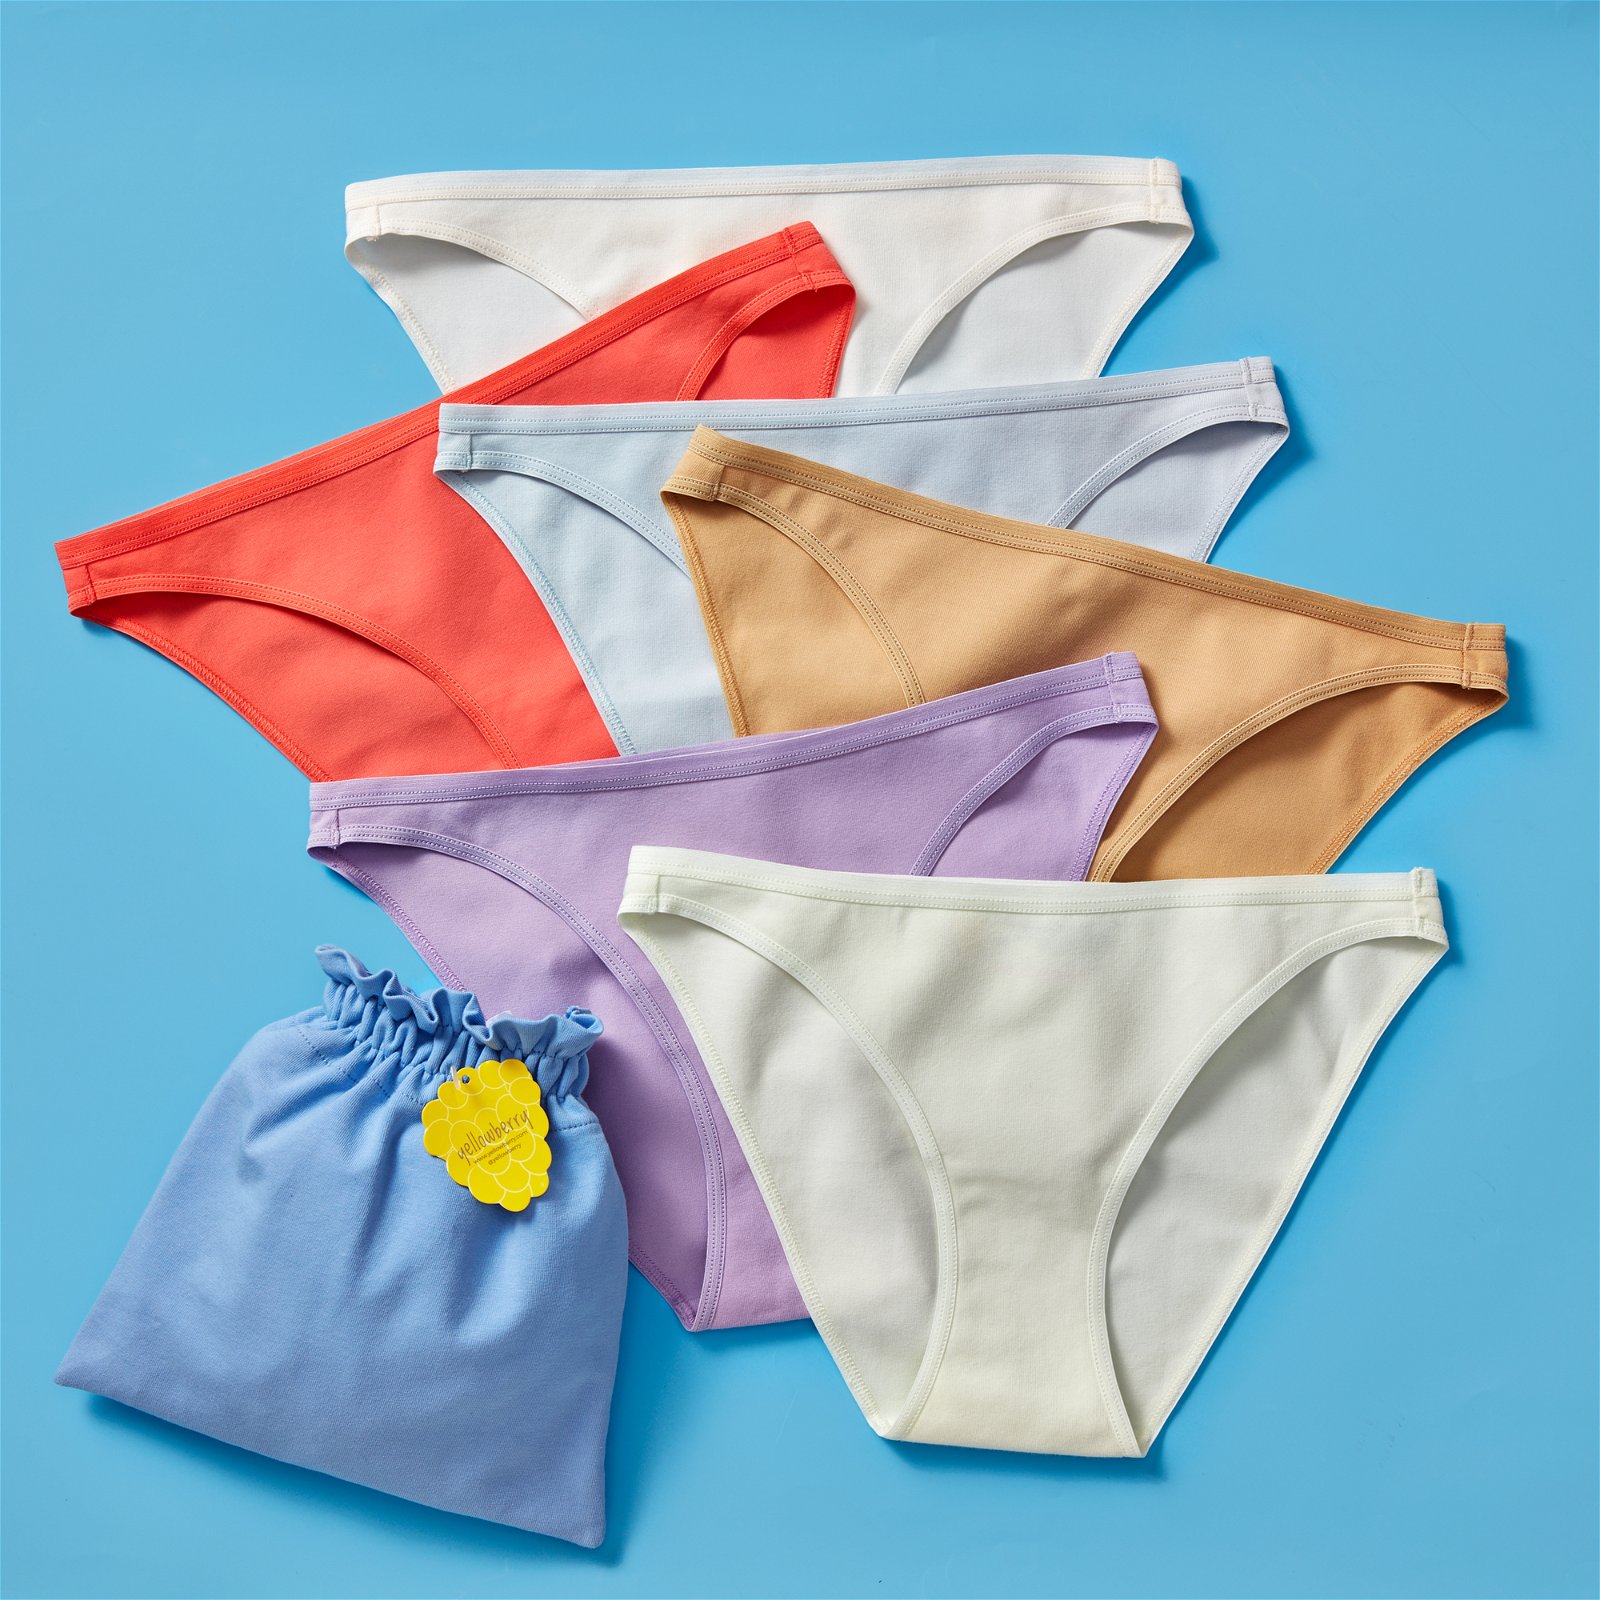 NEW Scout Seamless Undie - Yellowberry